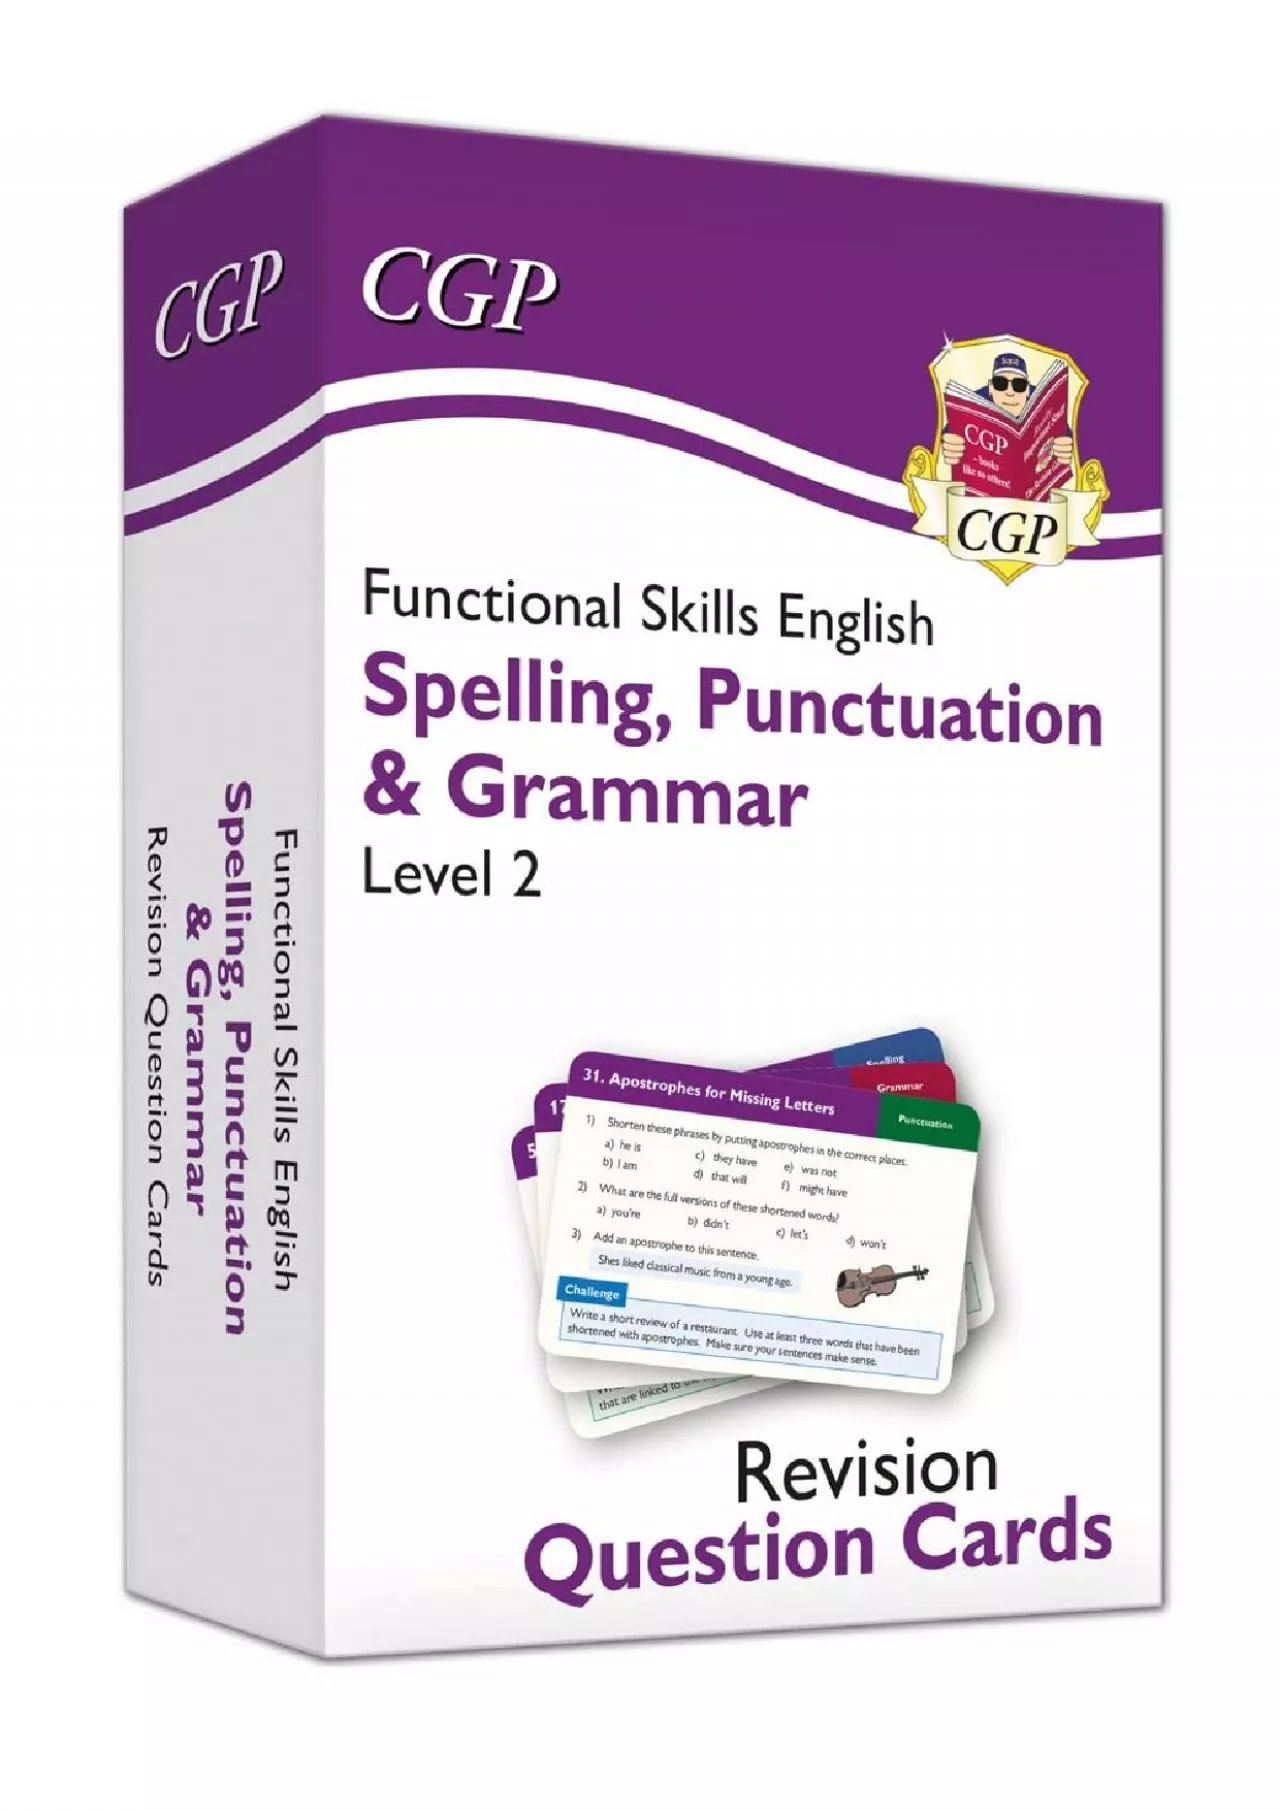 [READ] New Functional Skills English Revision Question Cards: Spelling, Punctuation  Grammar